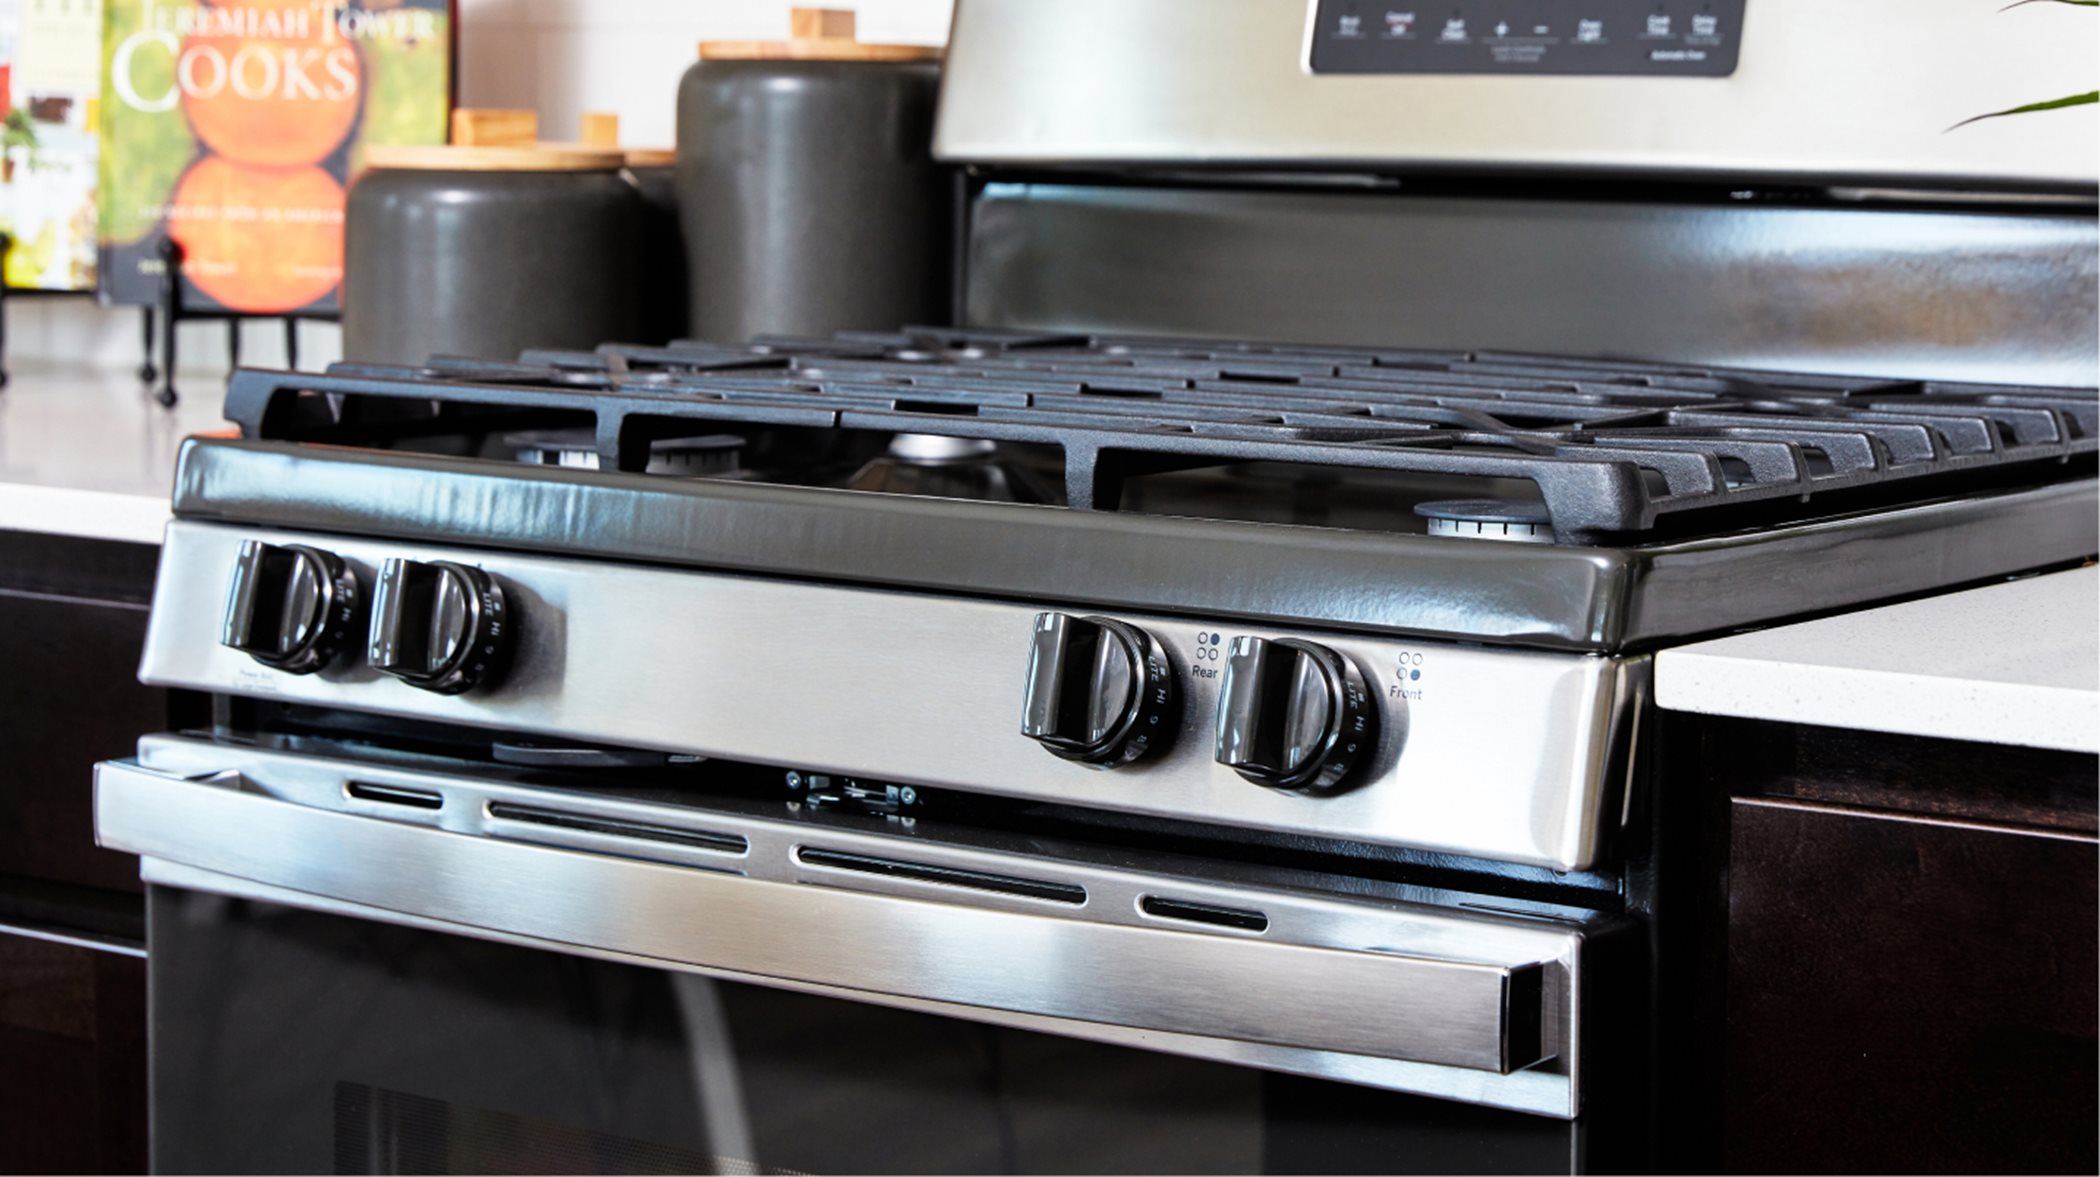 A set of brand-new appliances in the kitchen